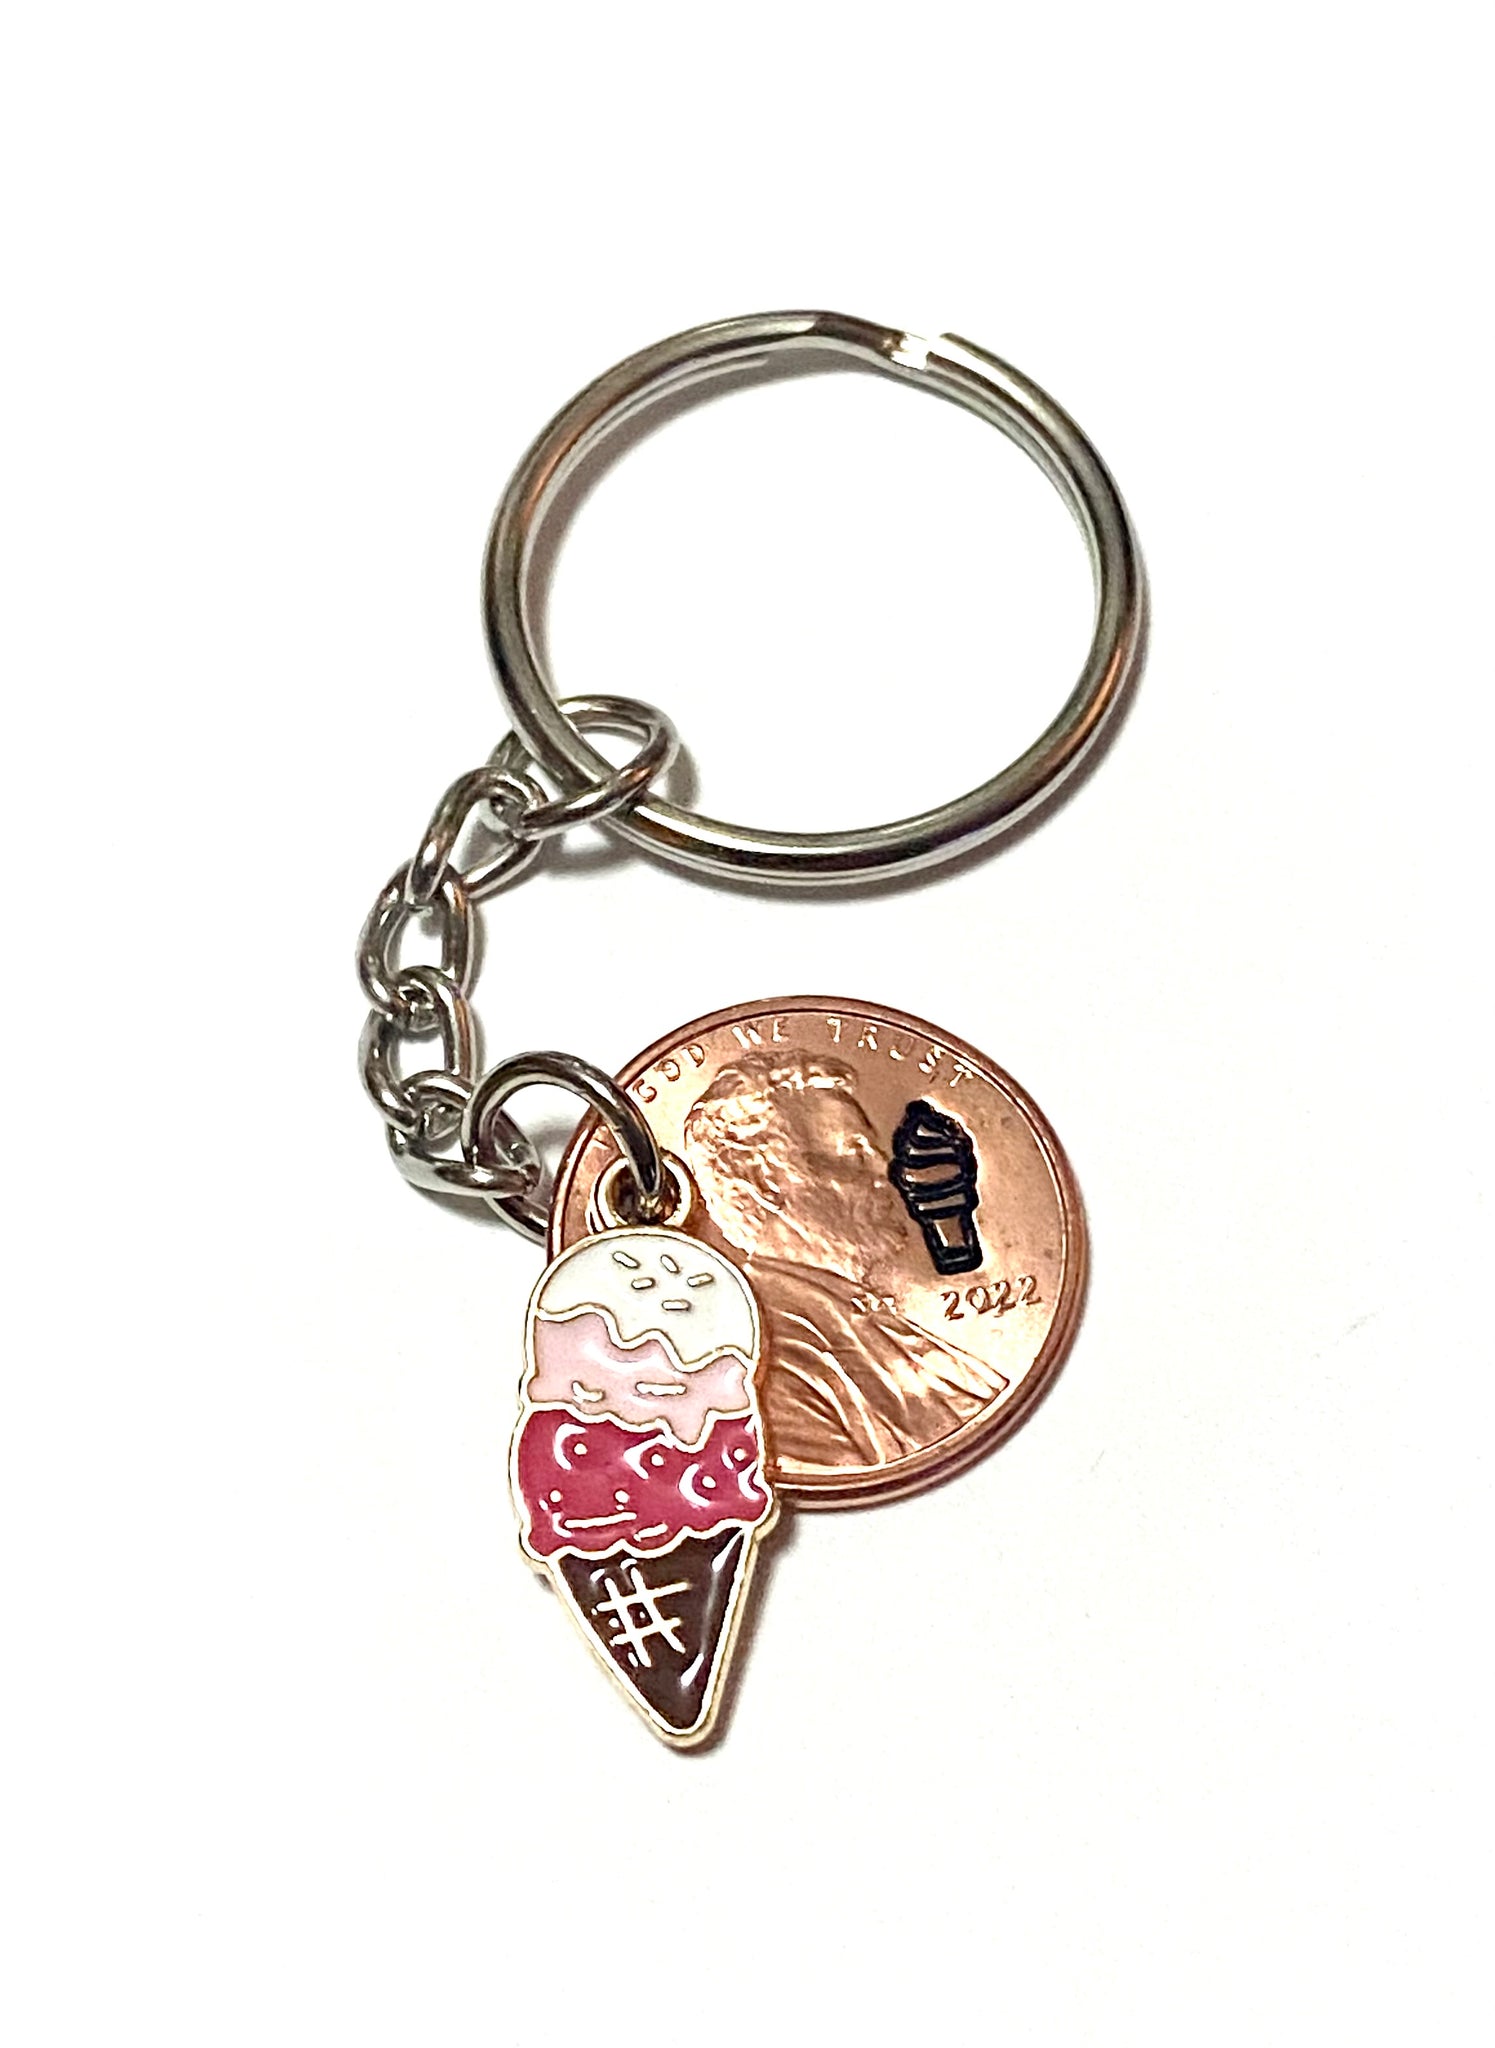 A Lucky Penny Keychain from Palmetto Charms with an enamel ice cream charm with a detailed design of an ice cream cone engraved above the date of a Lincoln Cent.